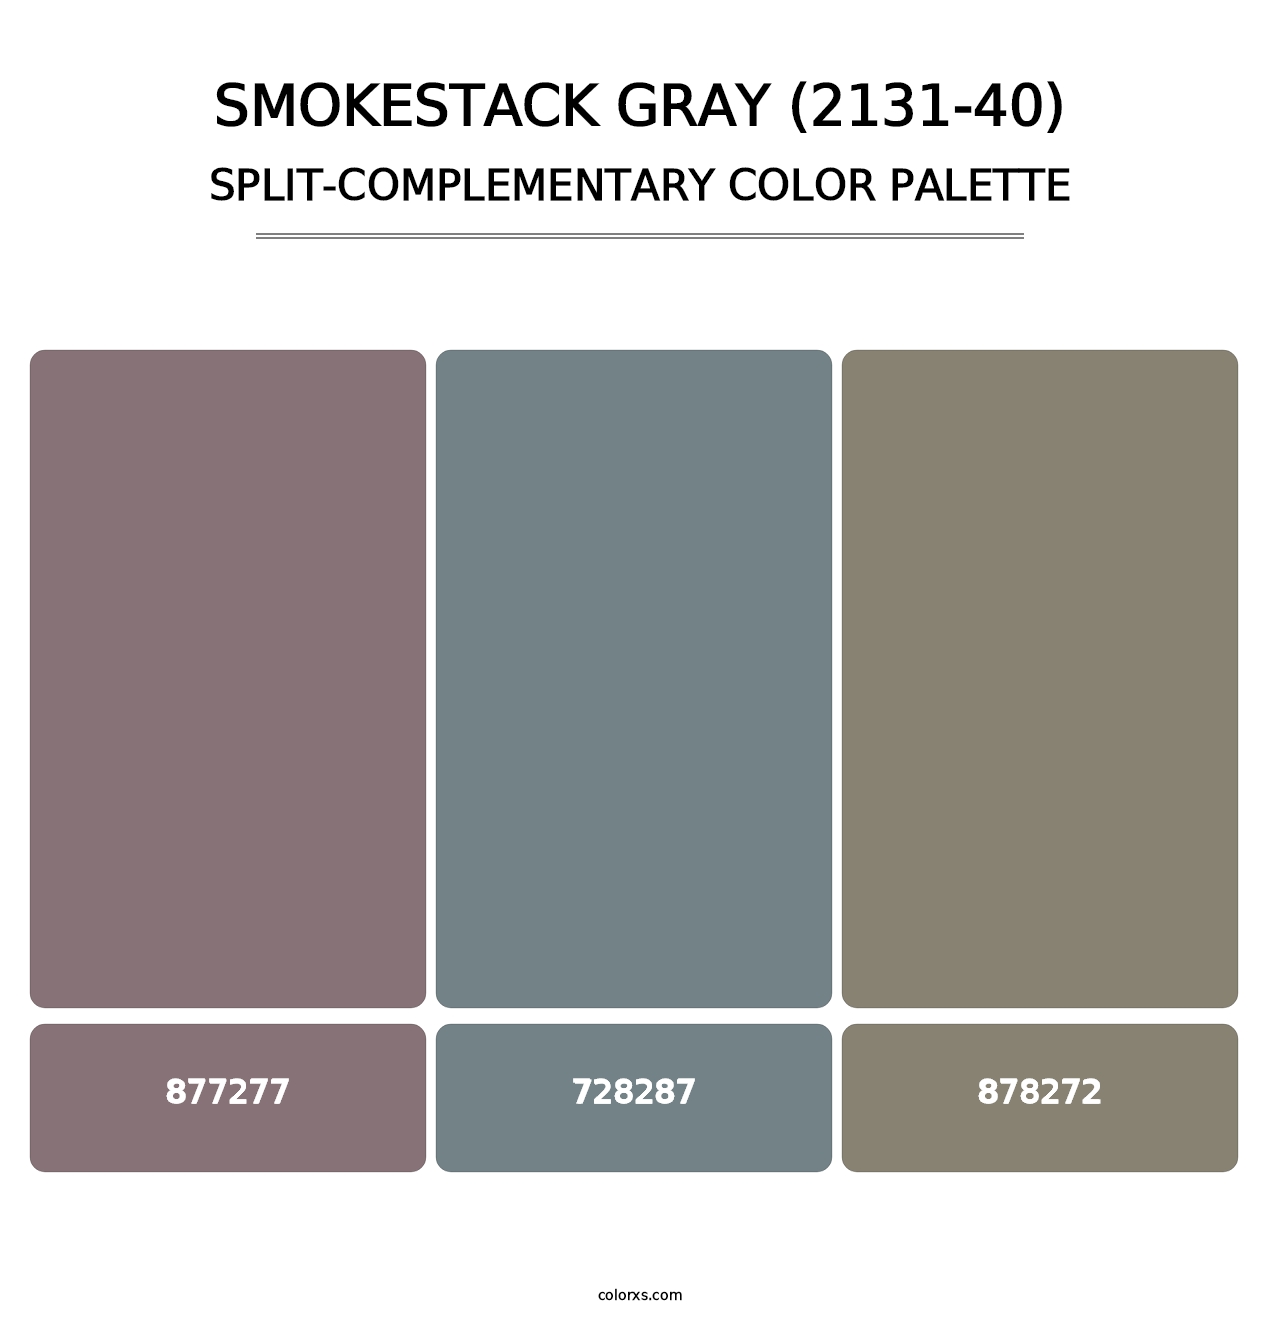 Smokestack Gray (2131-40) - Split-Complementary Color Palette